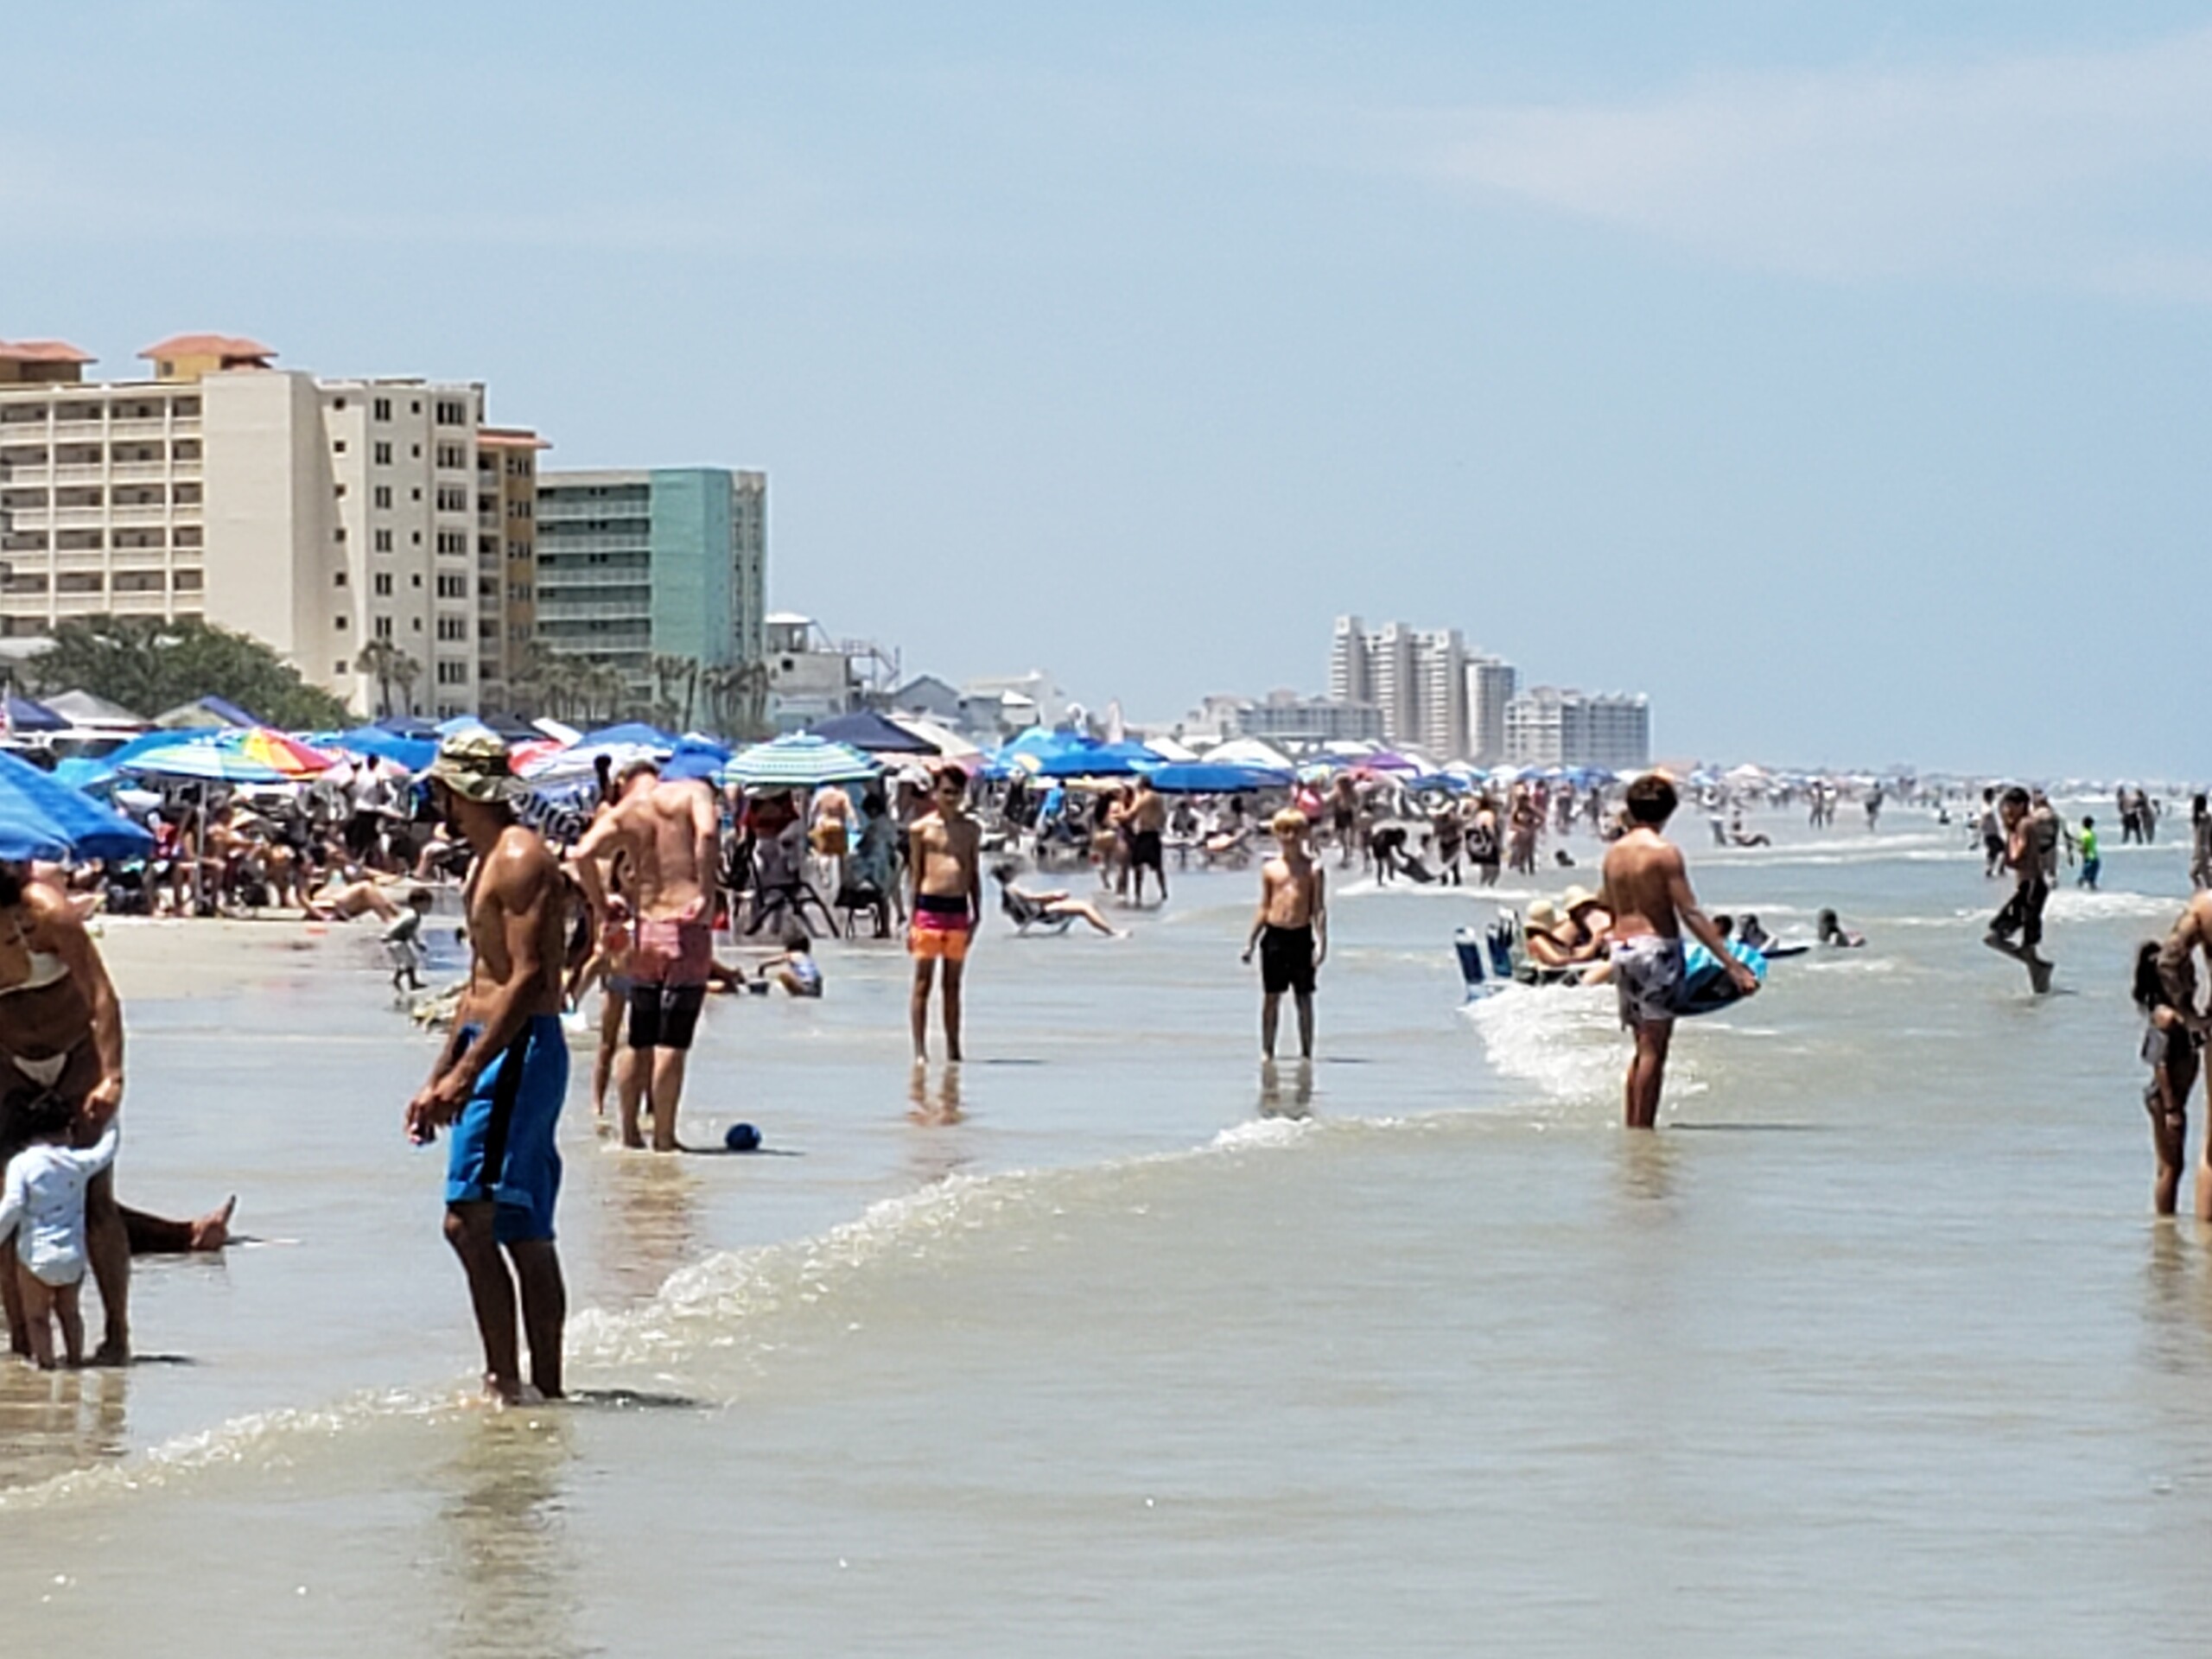 Featured image for “Warm coastal waters may fuel flesh-eating bacteria”